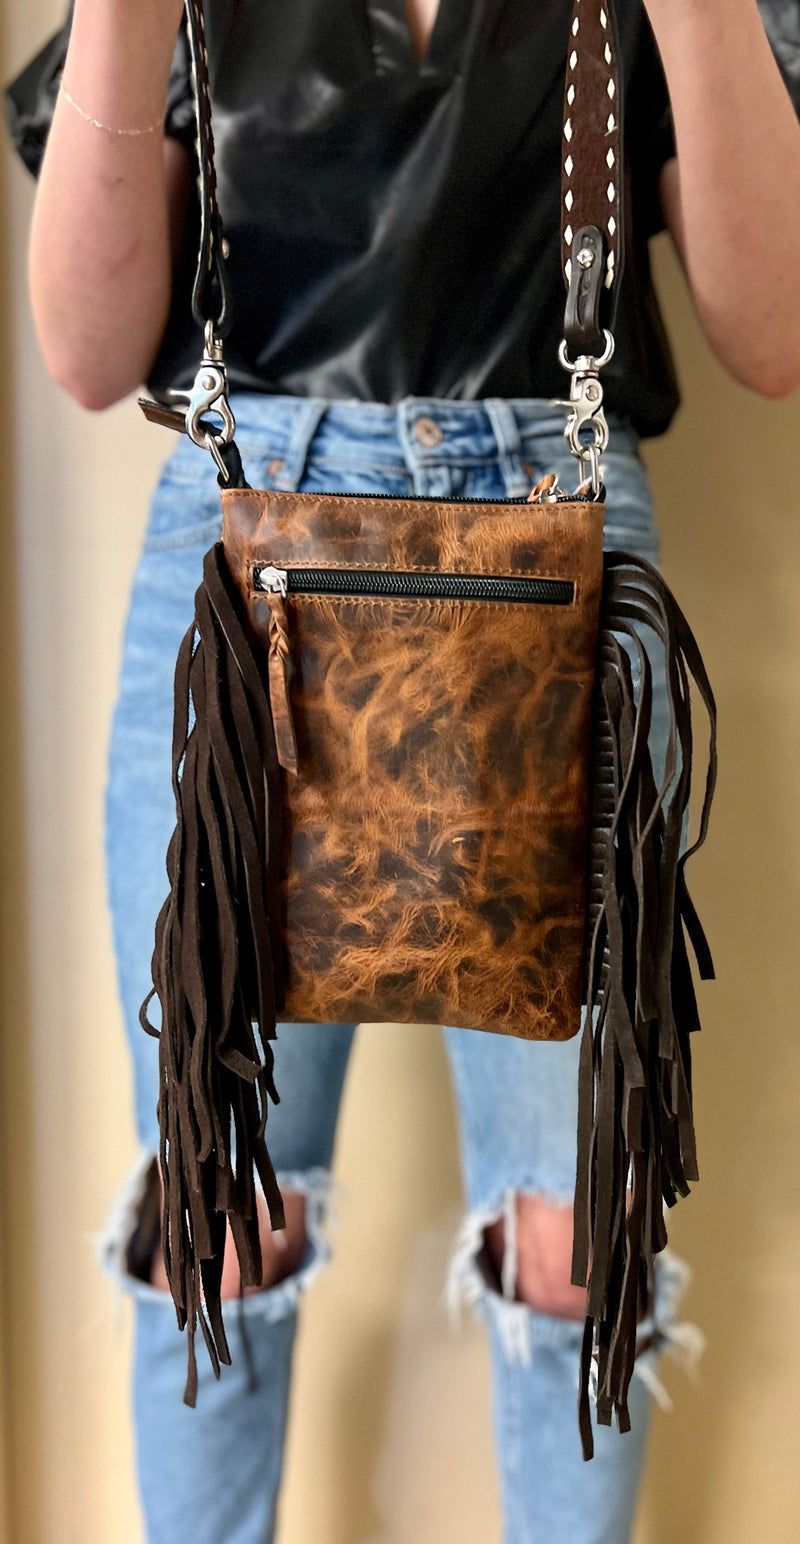 Leather bag. Leather strap. Tooled leather. Buckstitch. Rawhide bag. Leather fringe. Leather bag with fringe. Brown leather bag. Tooled leather strap. Women's bag. Western style bag. Cowgirl style bag. Women's western accessories. Women's western boutique. Western boutique. Women's boutique. Small business. Woman owned. 